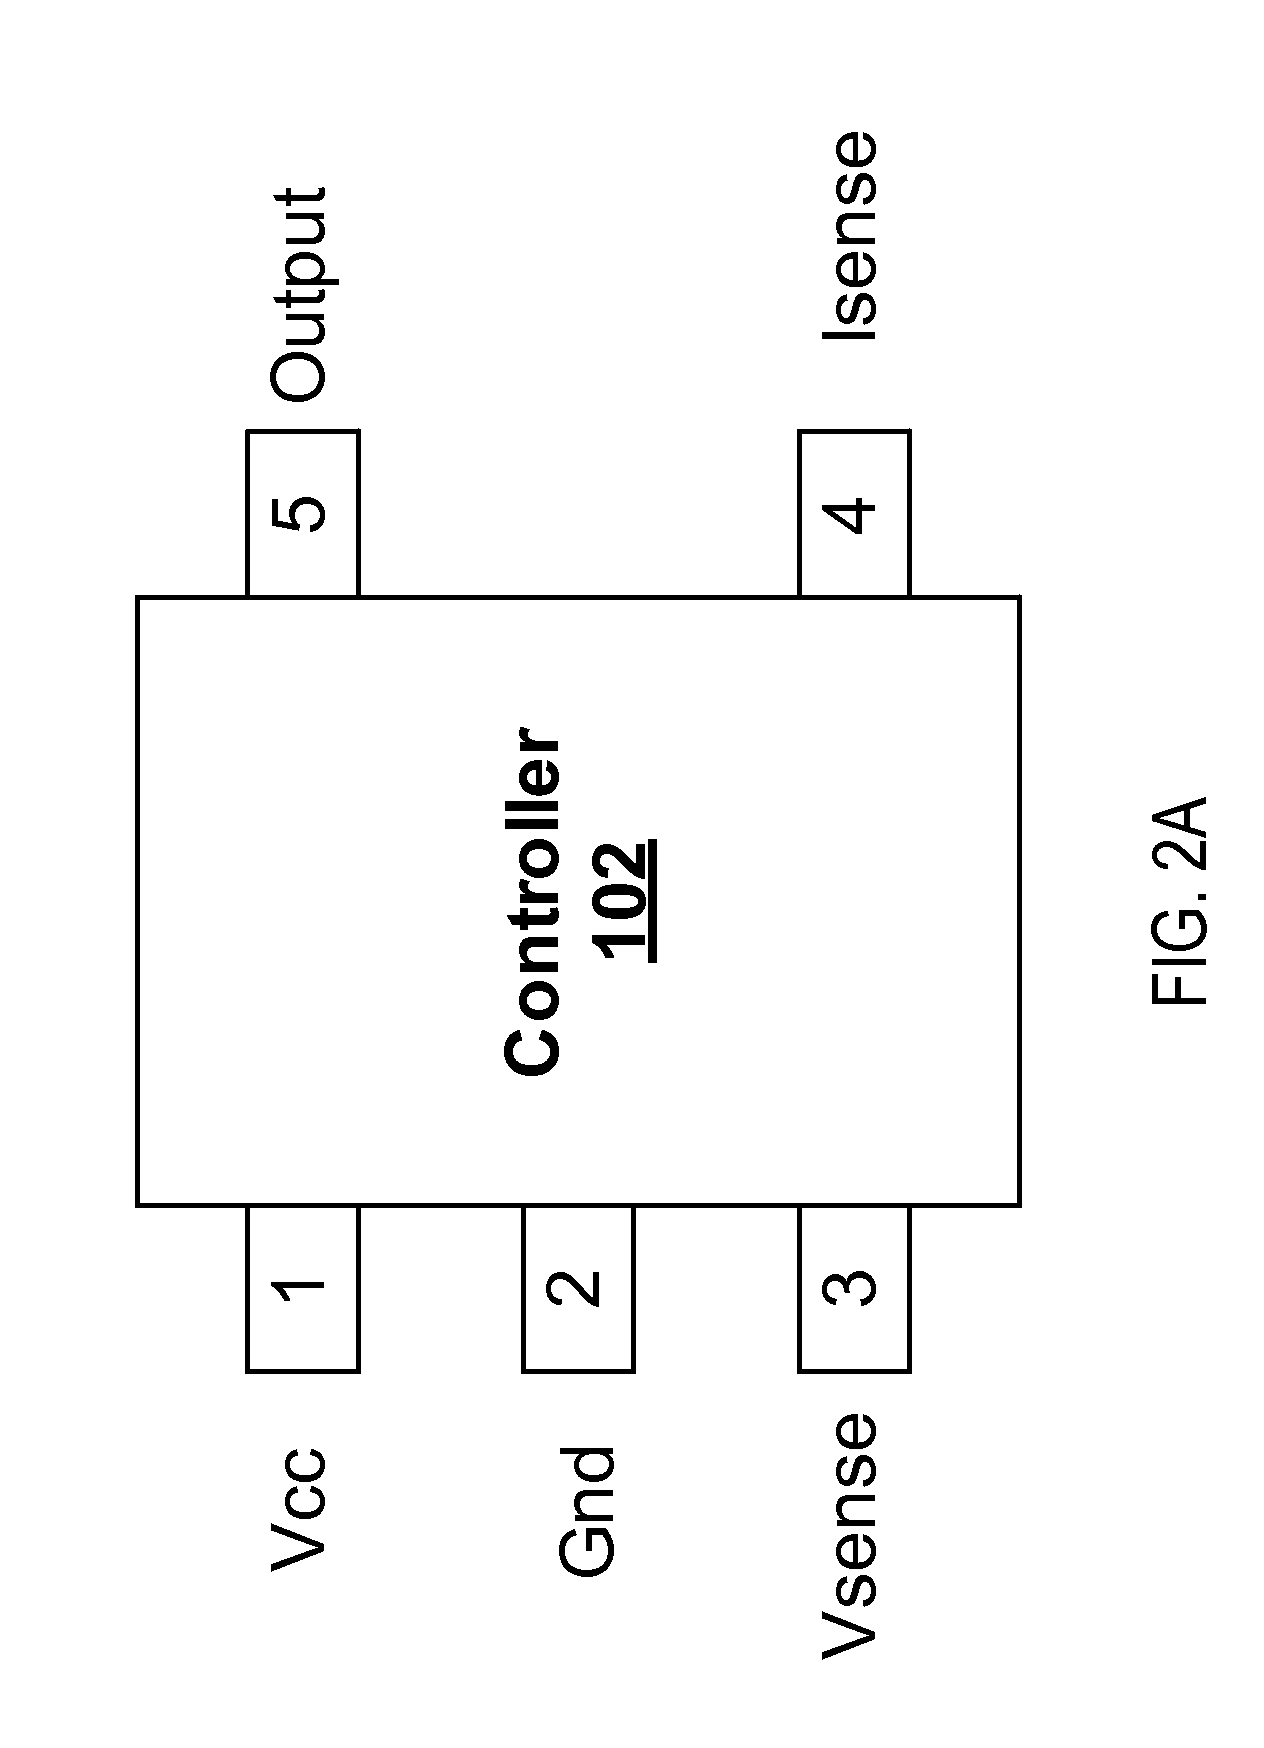 EMI Frequency Spreading Method for Switching Power Converter